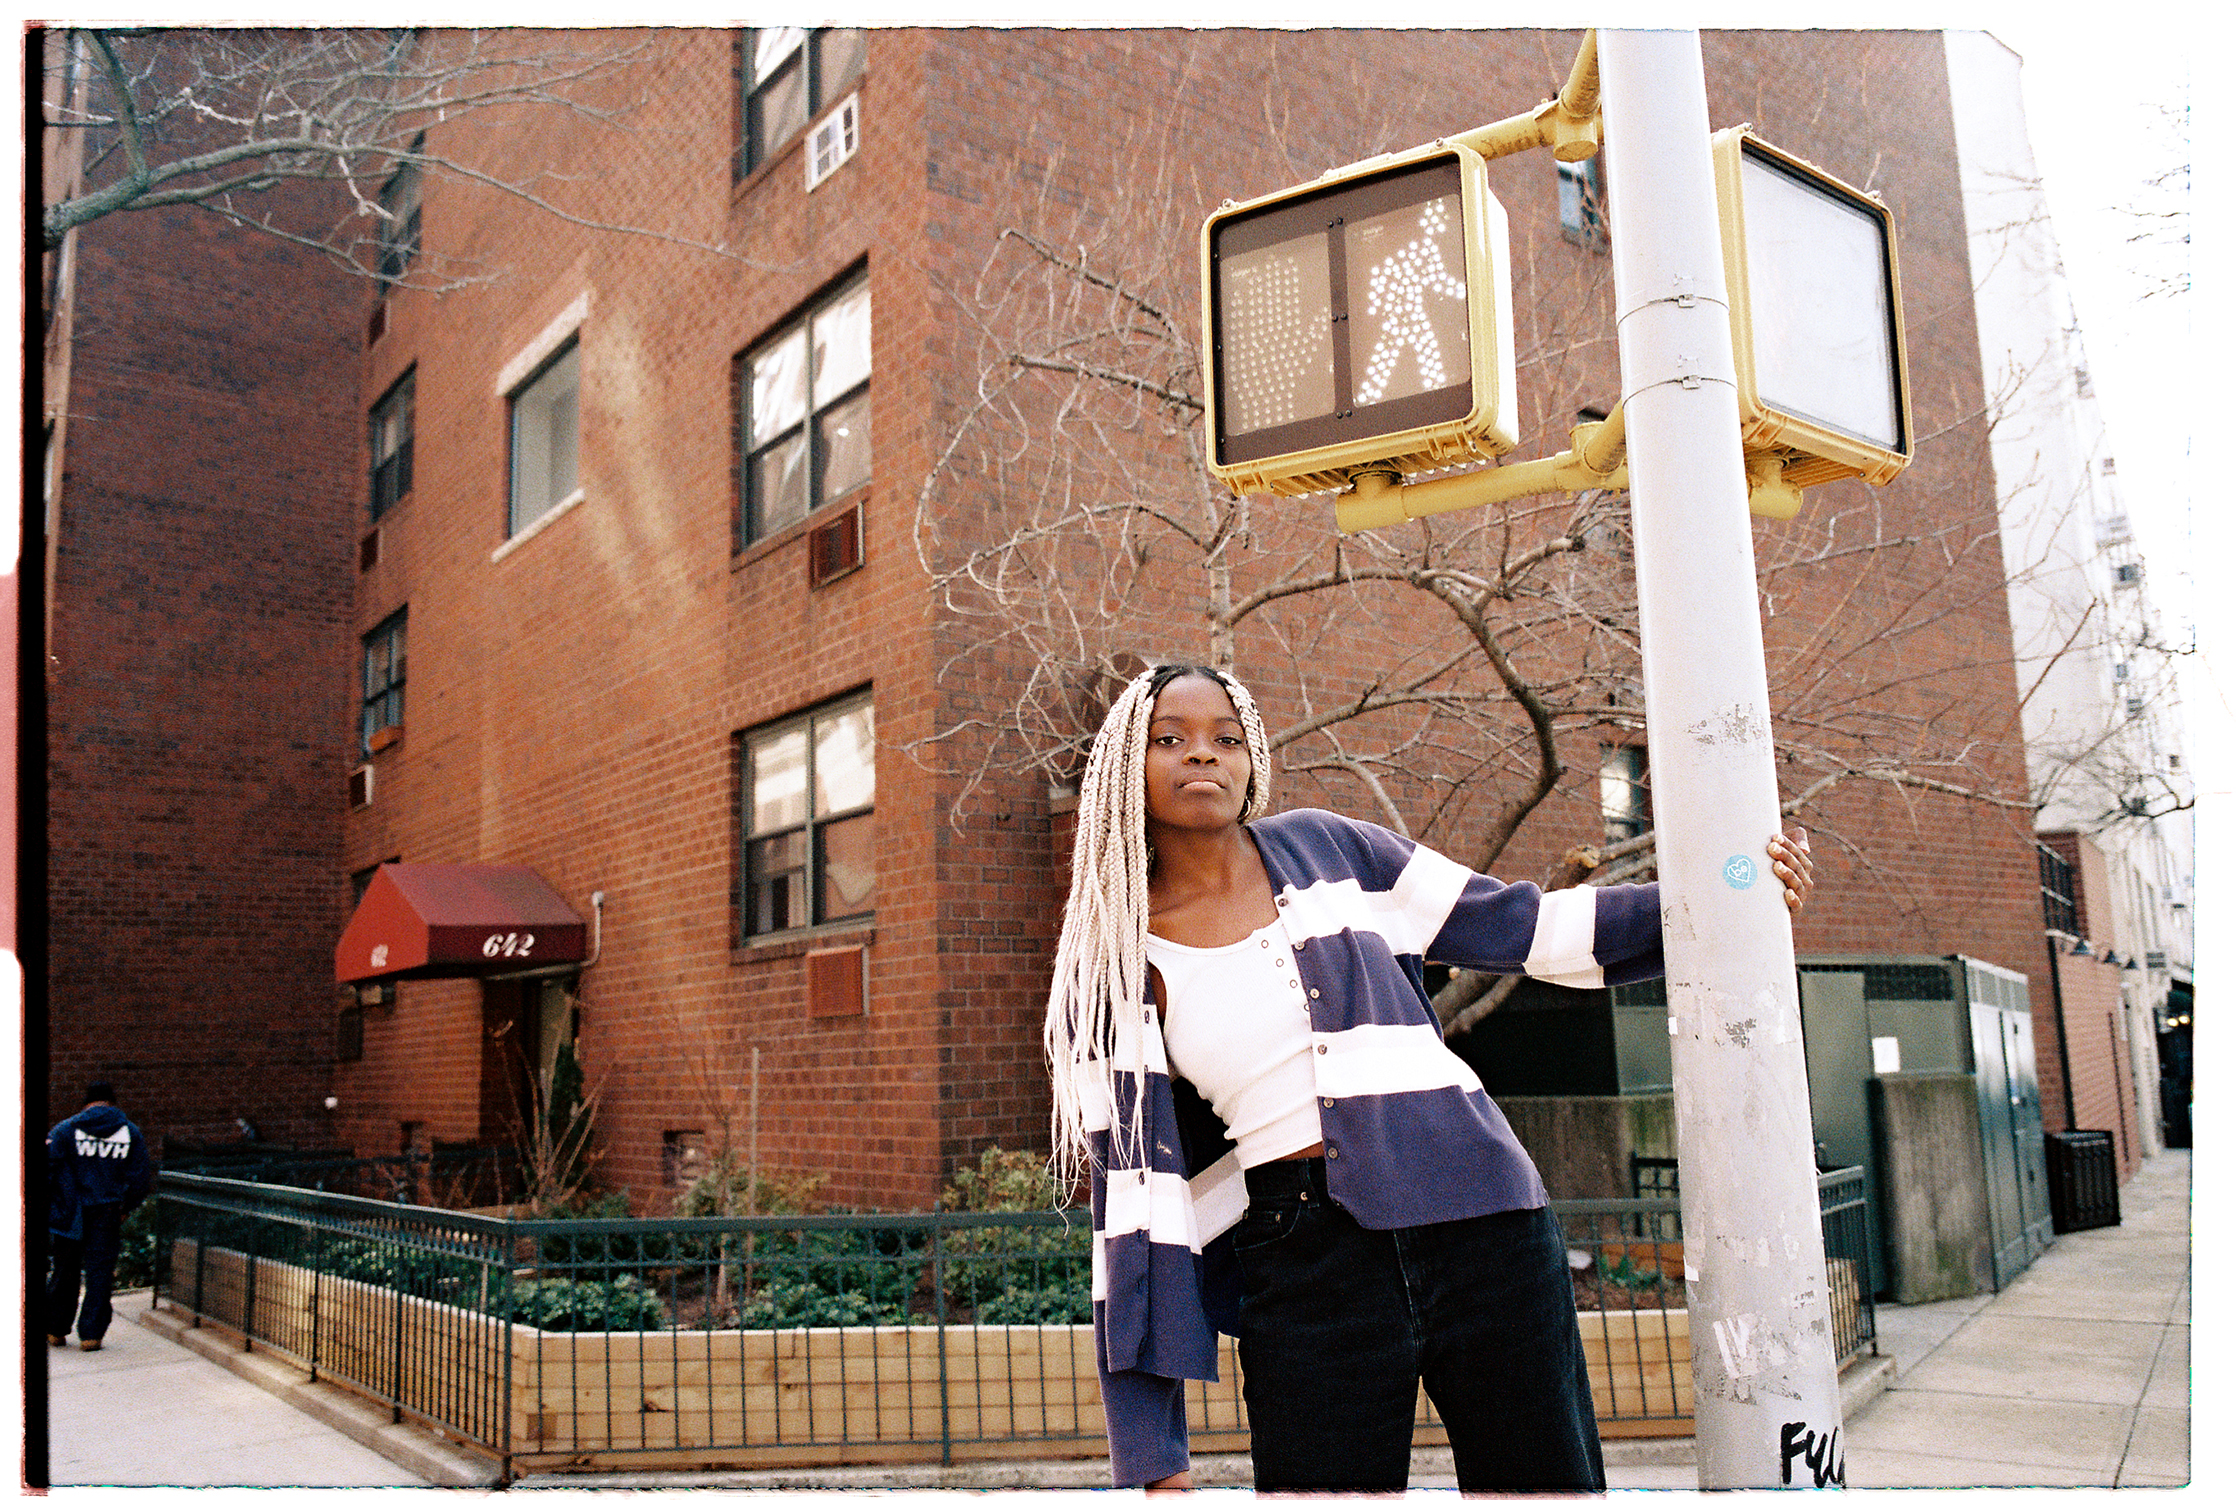 Wearing a black and white striped sweater, Hannah Jadagu stands next to a light pole on the street